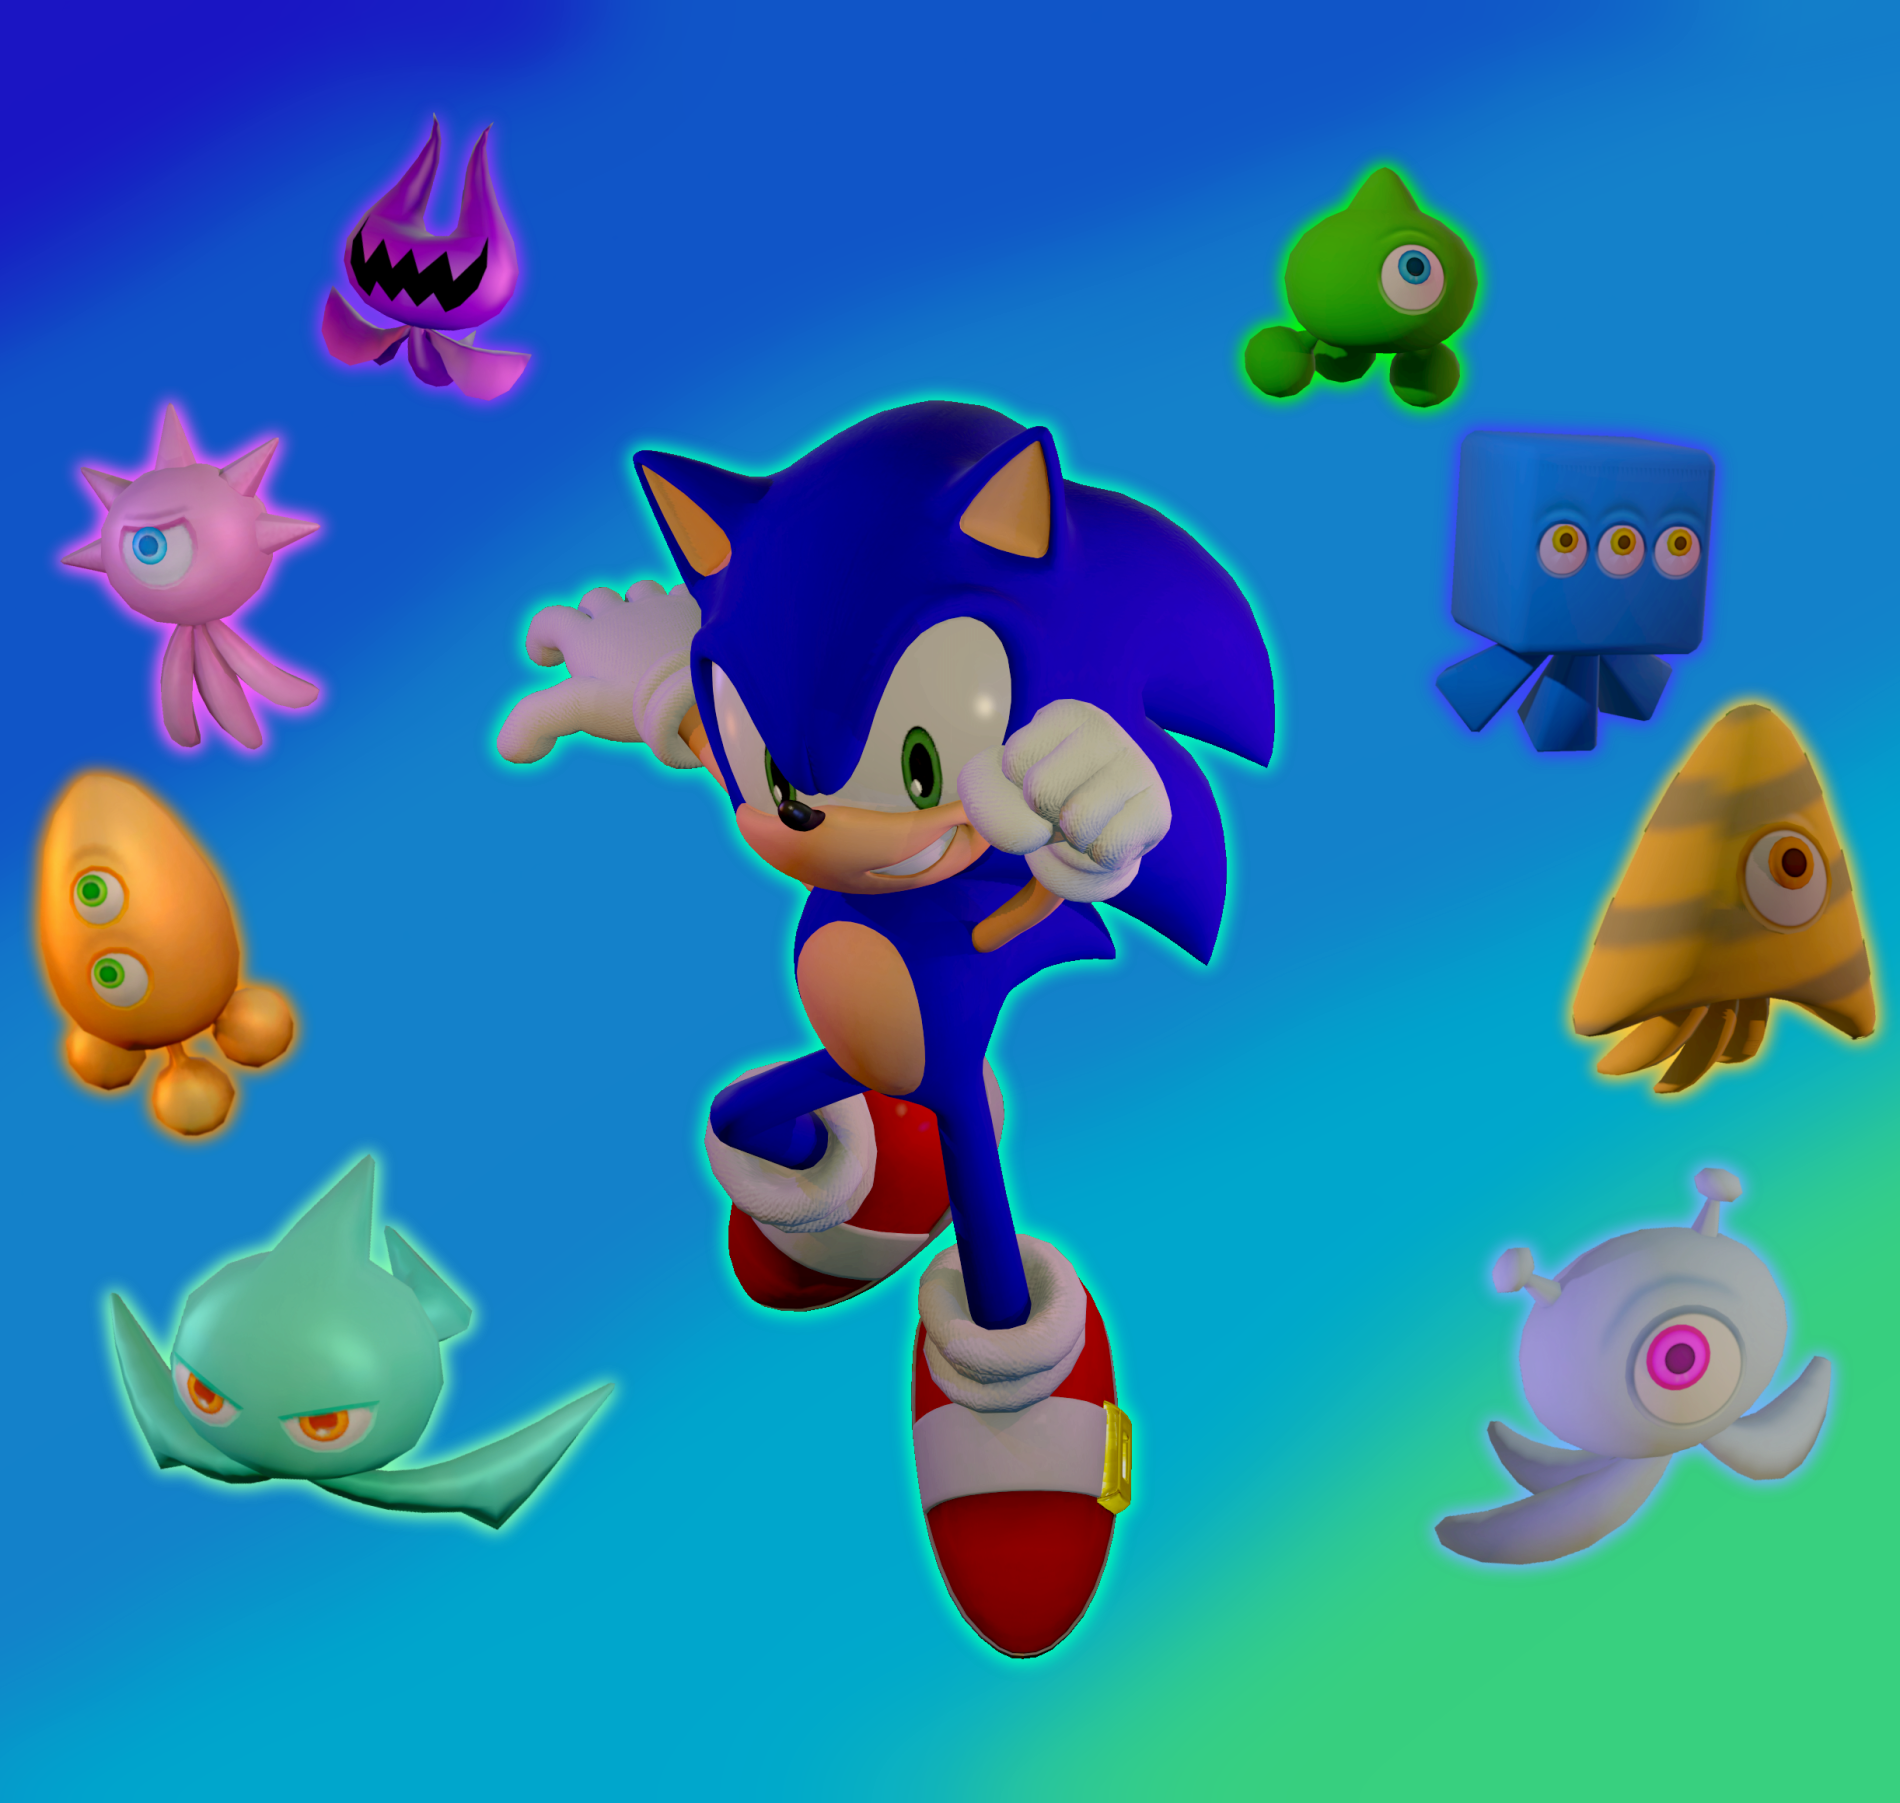 Sonic Colors: Rise of the Wisps Movie edit by DanielVieiraBr2020 on  DeviantArt